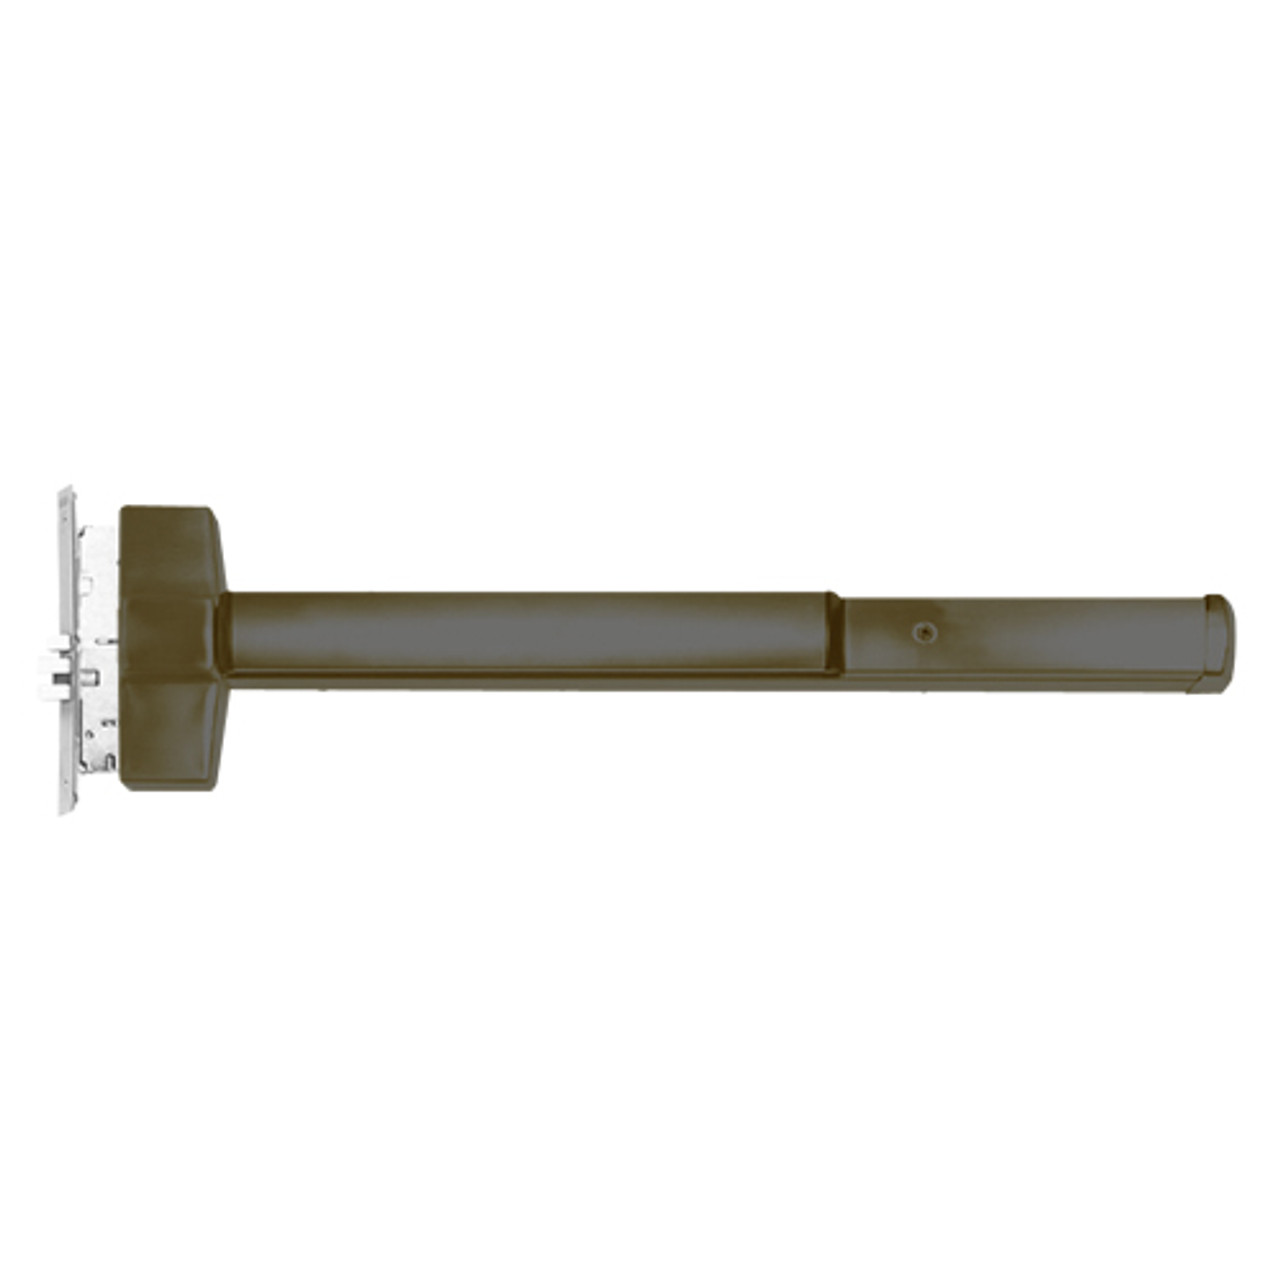 ED5600L-613-W048-LHR Corbin ED5600 Series Non Fire Rated Mortise Exit Device in Oil Rubbed Bronze Finish